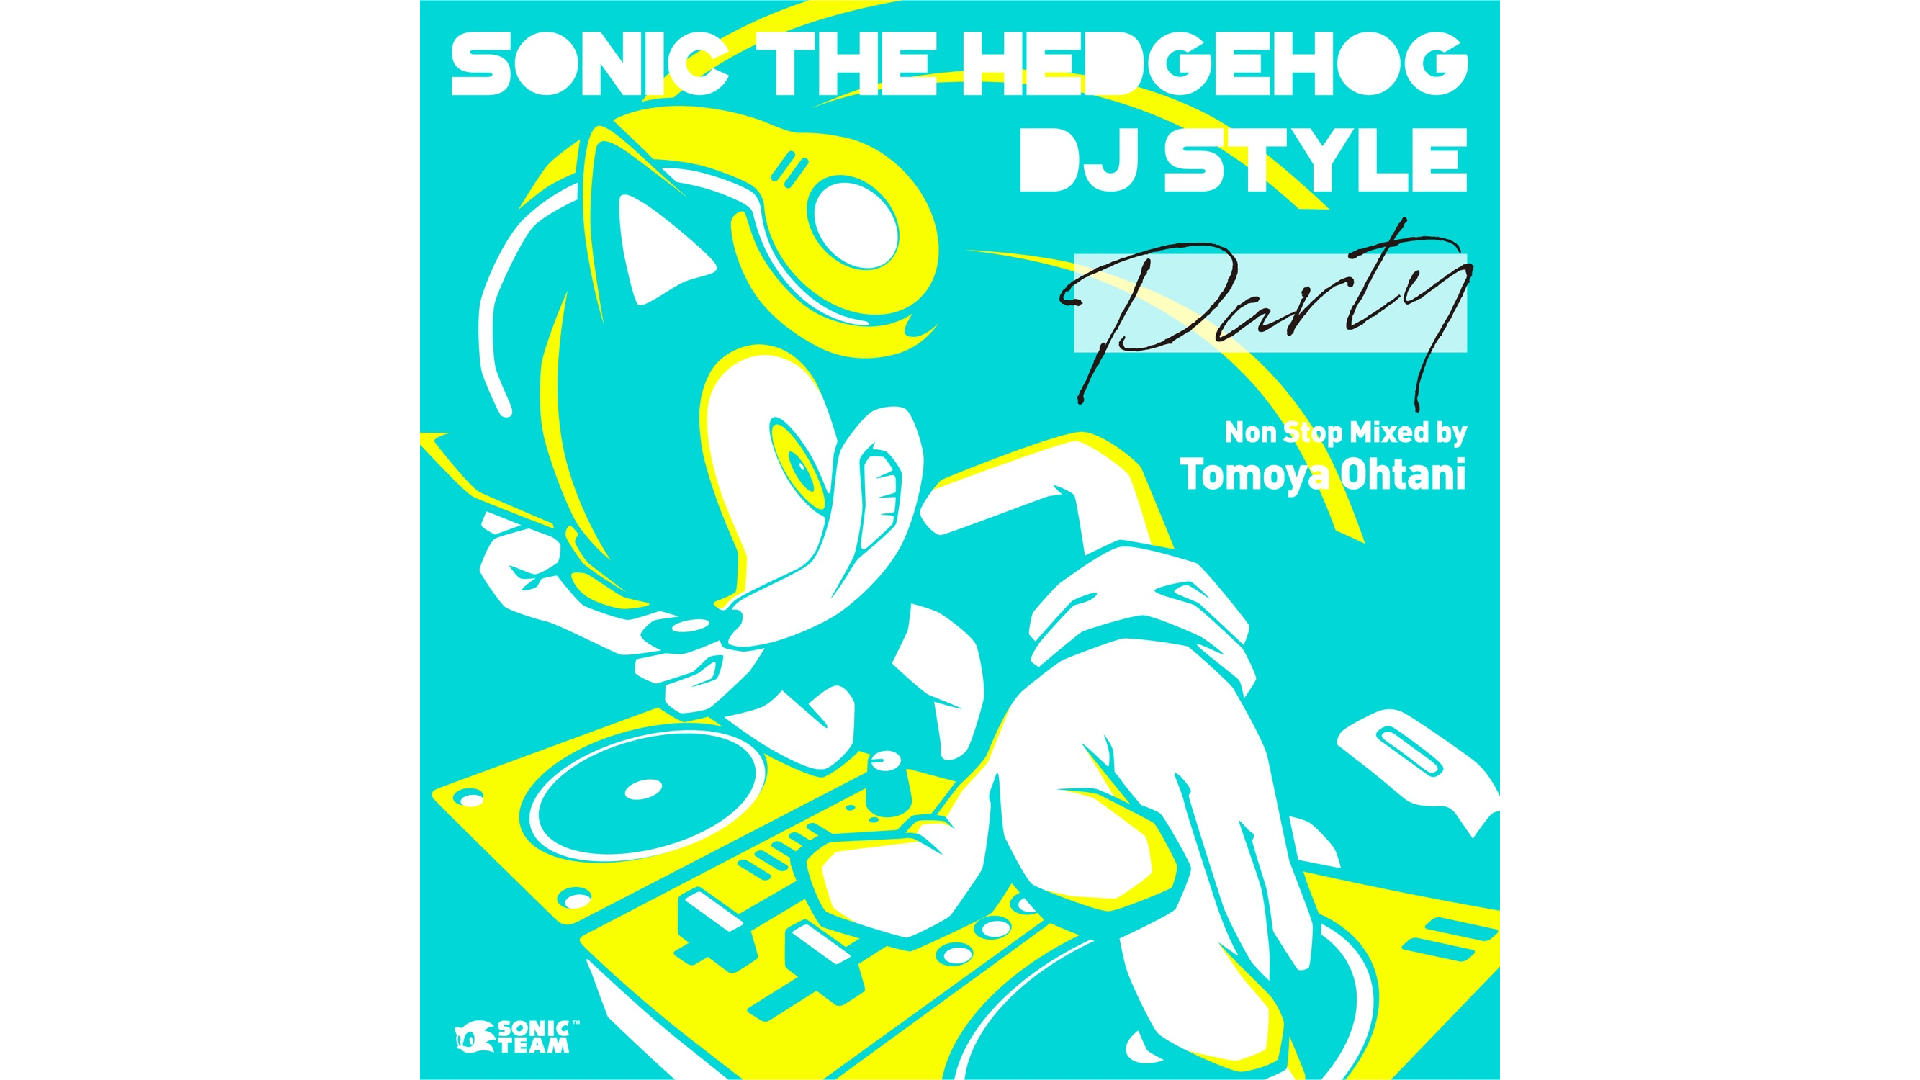 Sonic The Hedgehog DJ Style ”Party” Logo